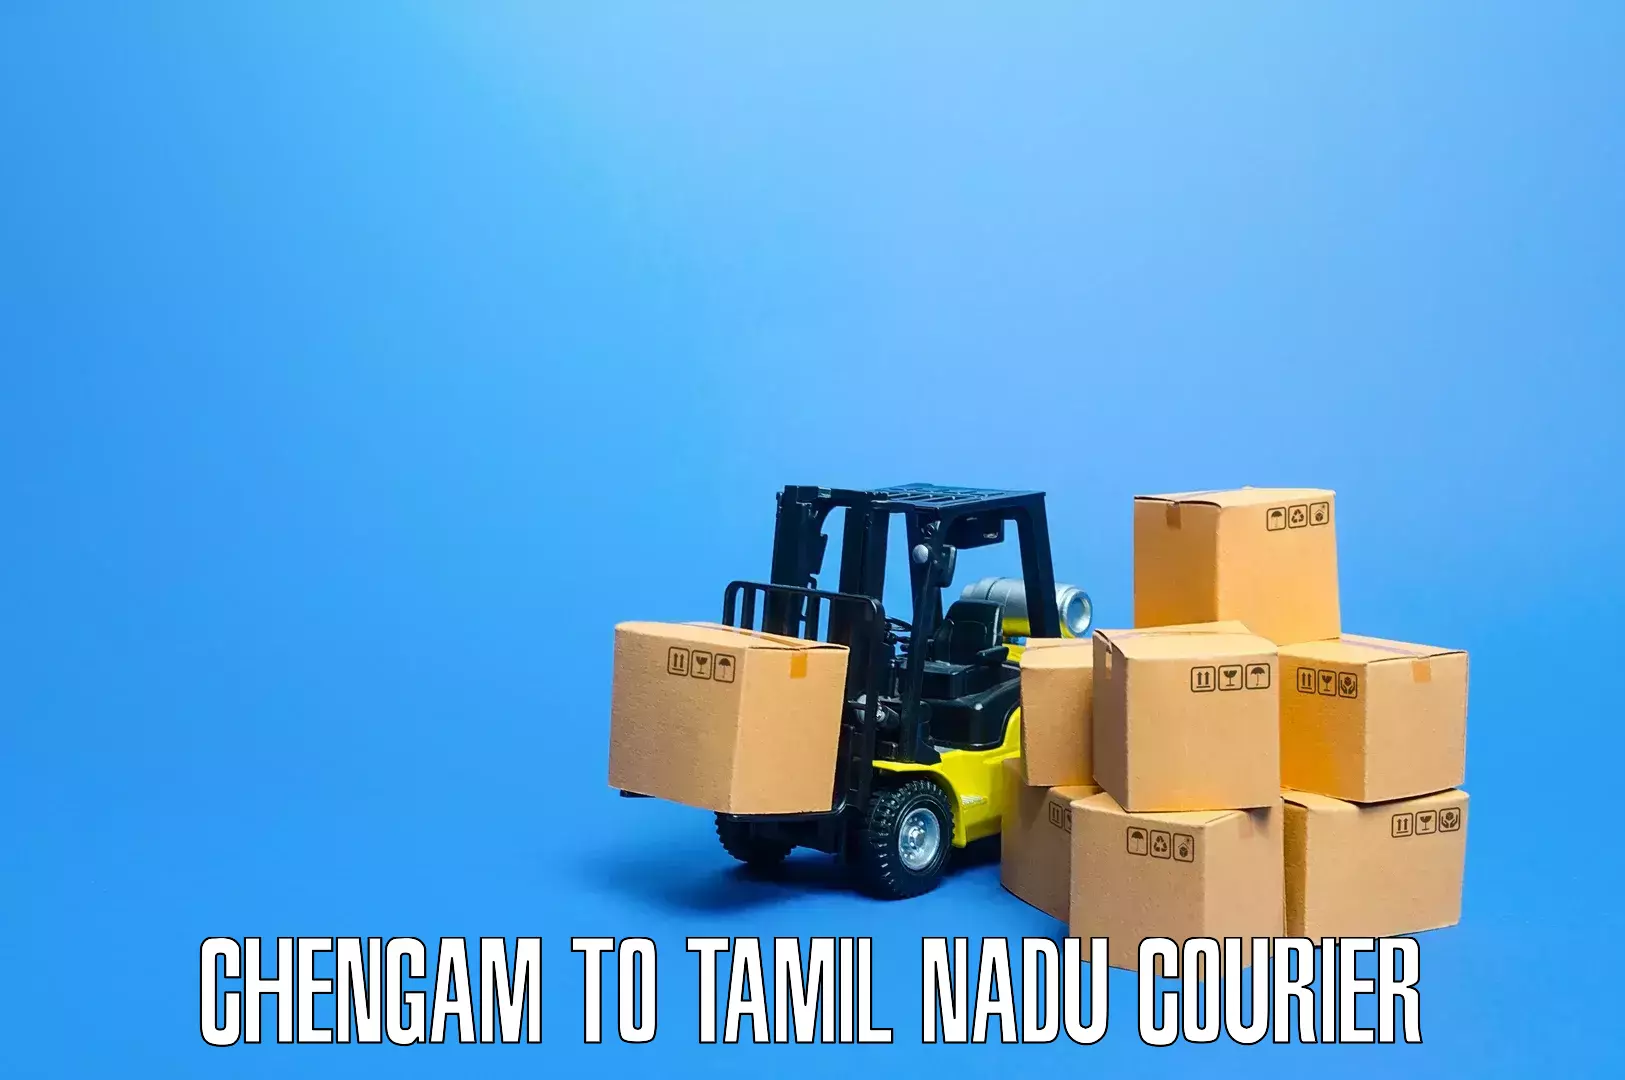 Furniture moving specialists Chengam to Tamil Nadu